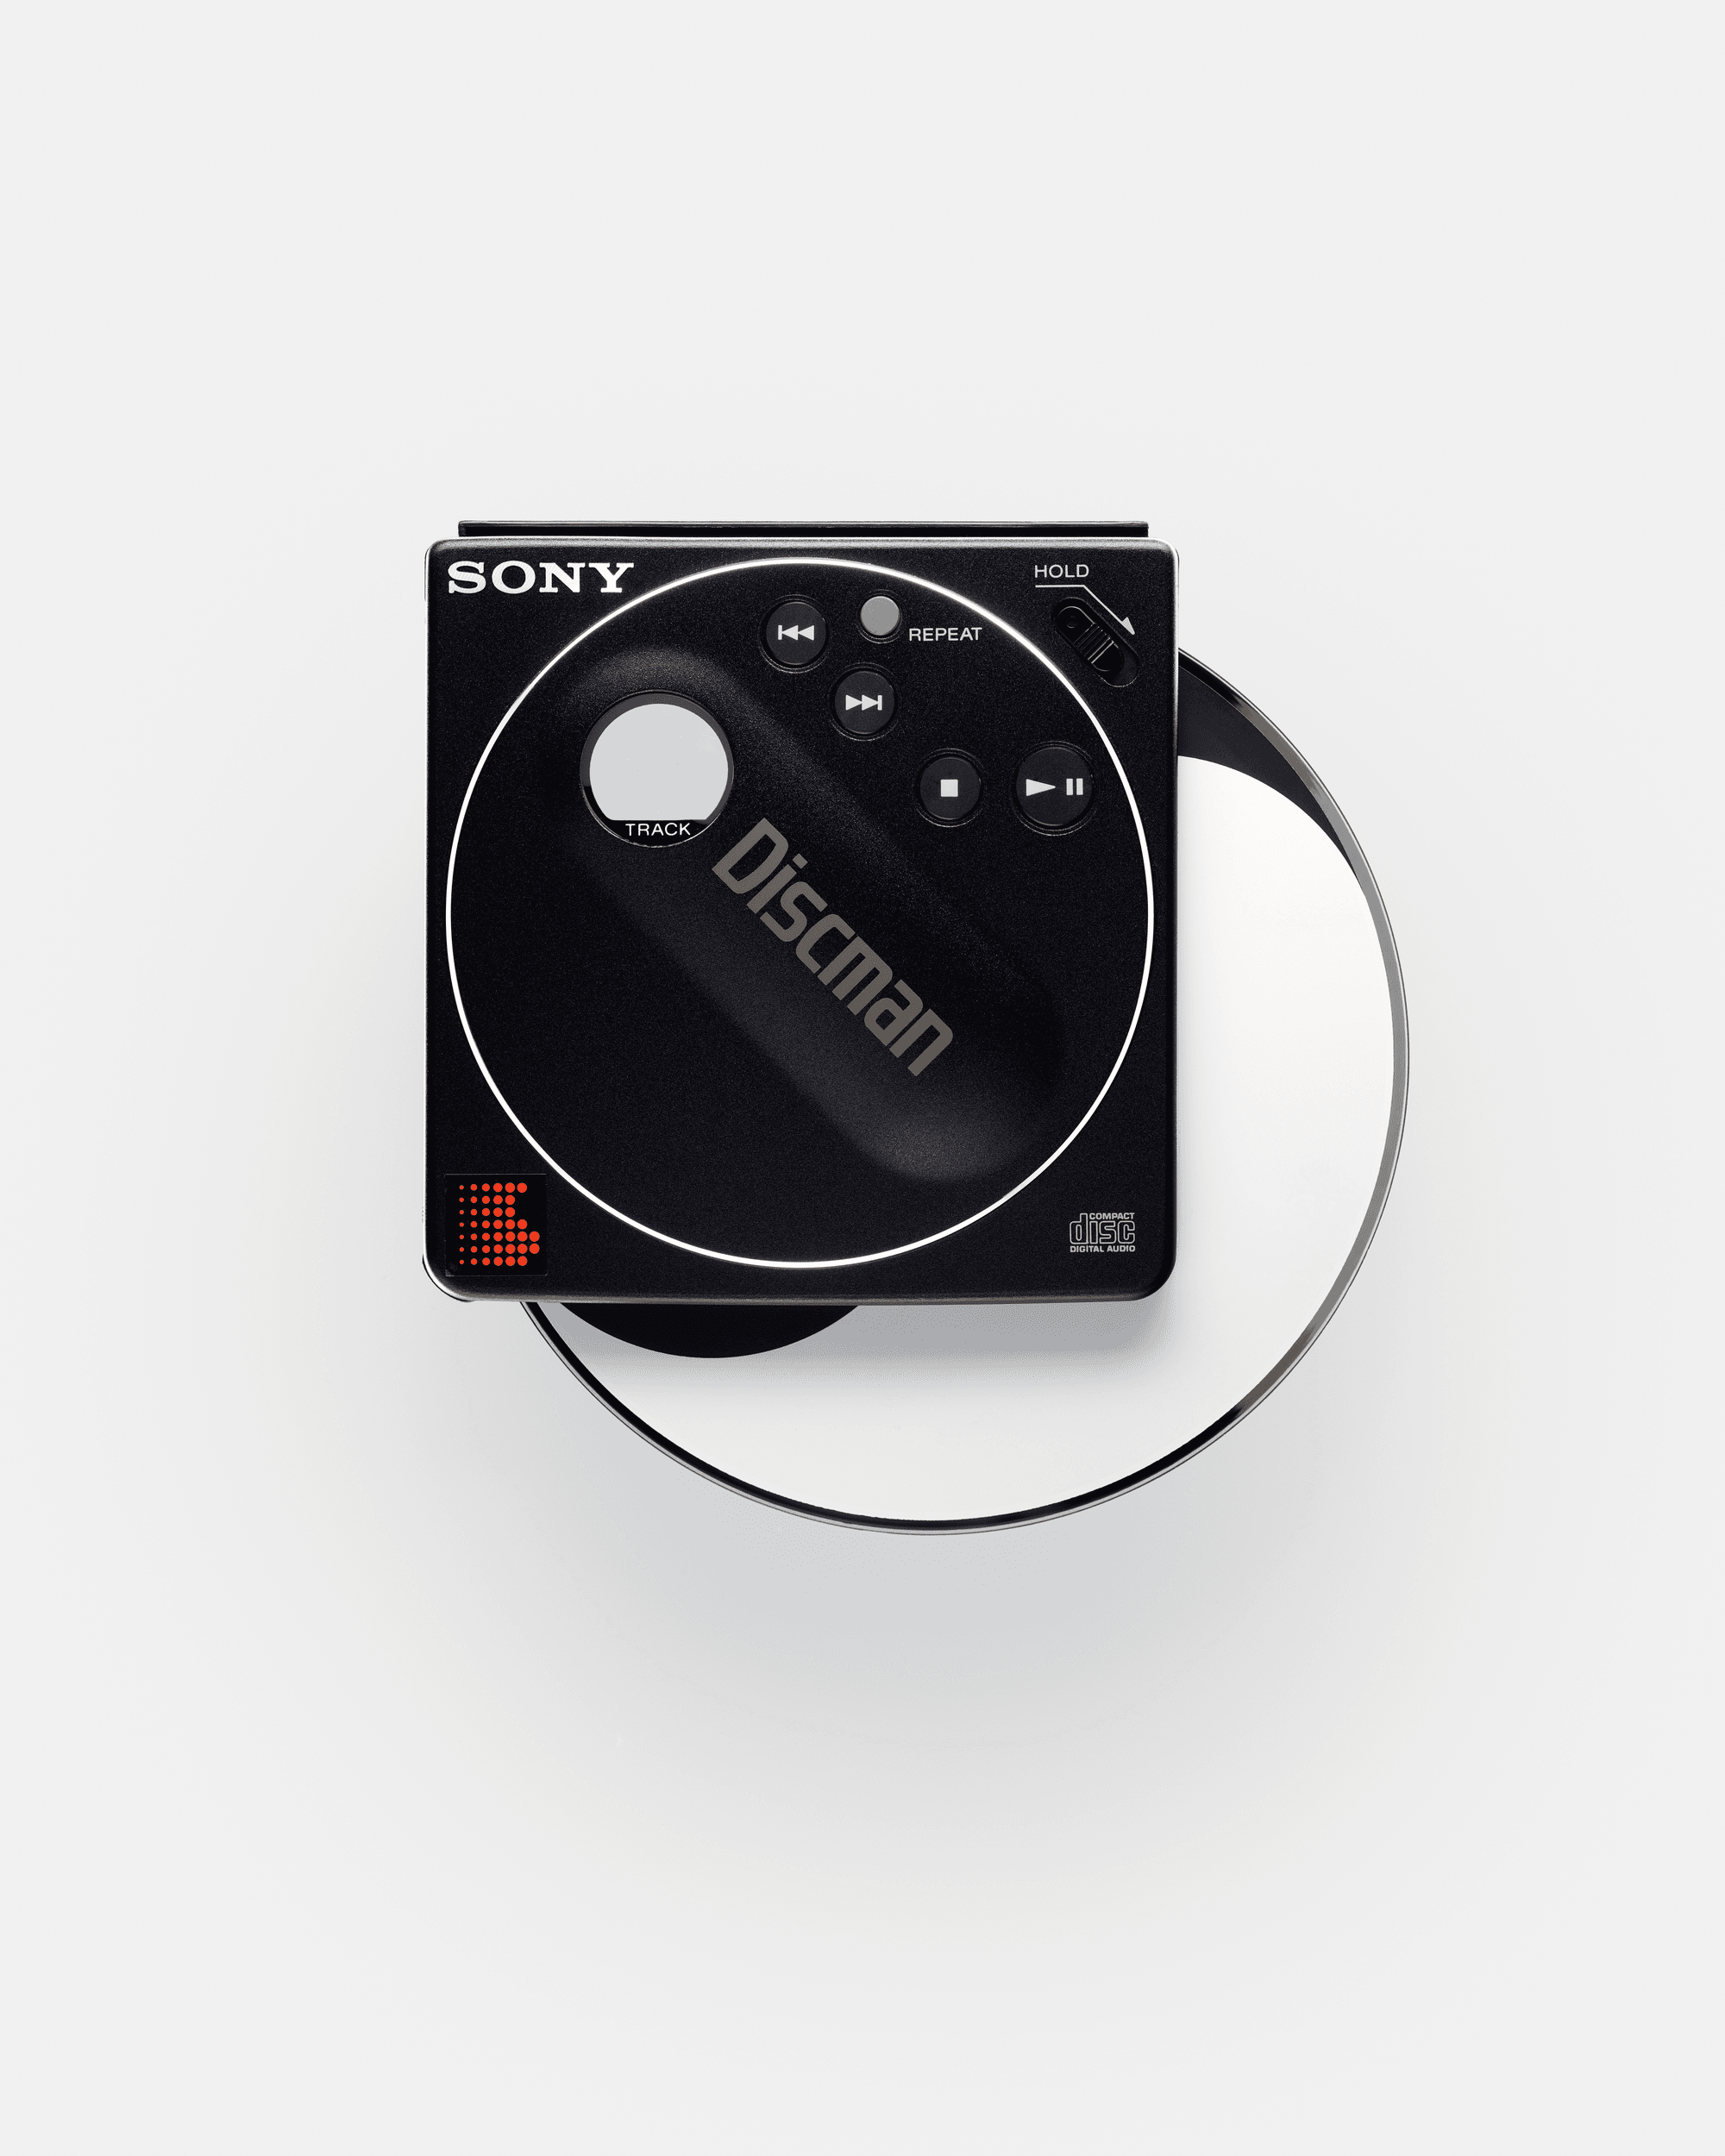 Sony Discman - Today, another homage to the Car Discman